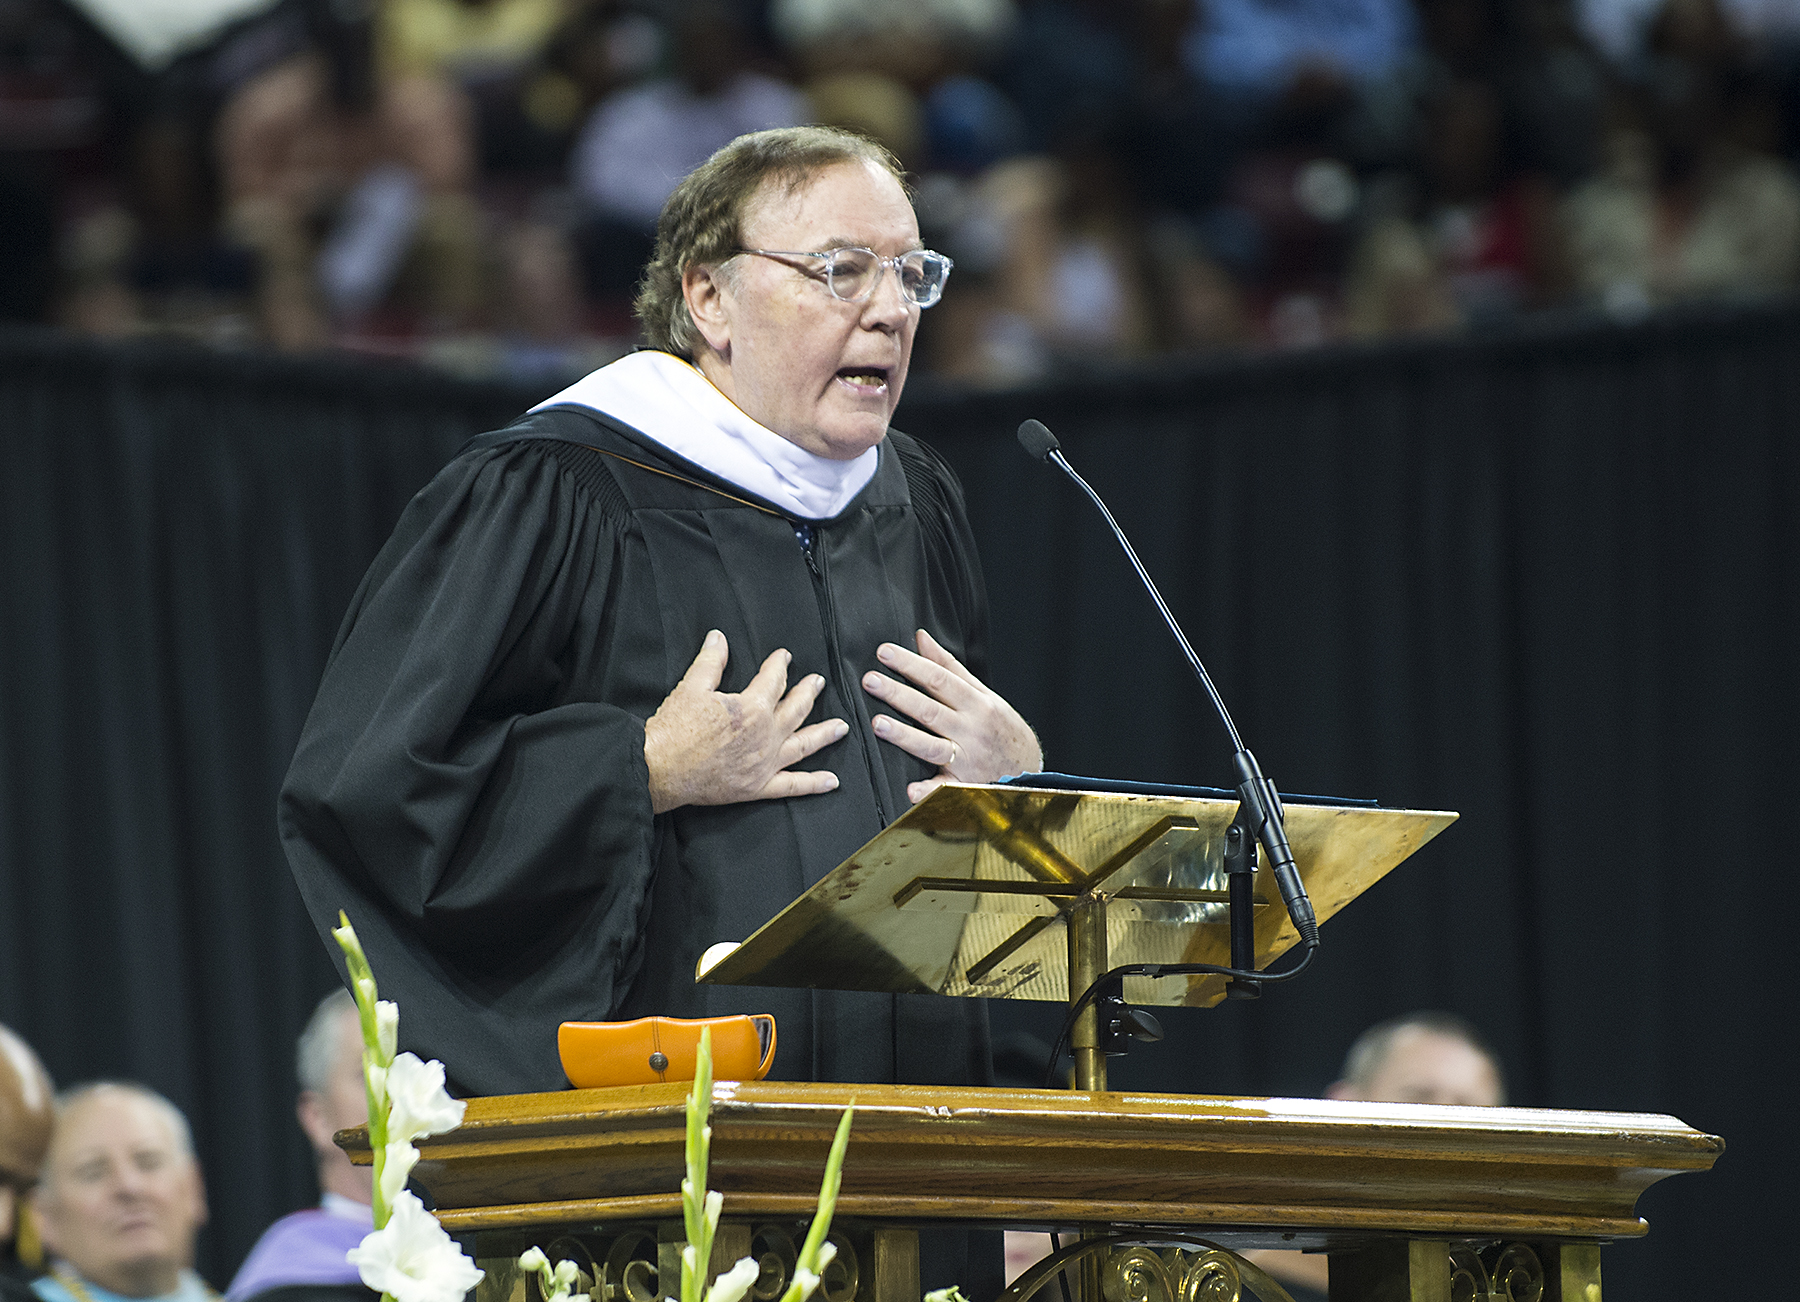 “Please dream big,” international best-selling and award-winning author James Patterson urged the more than 1,300 graduates during Friday’s [Dec. 11] fall commencement ceremonies at Mississippi State University.